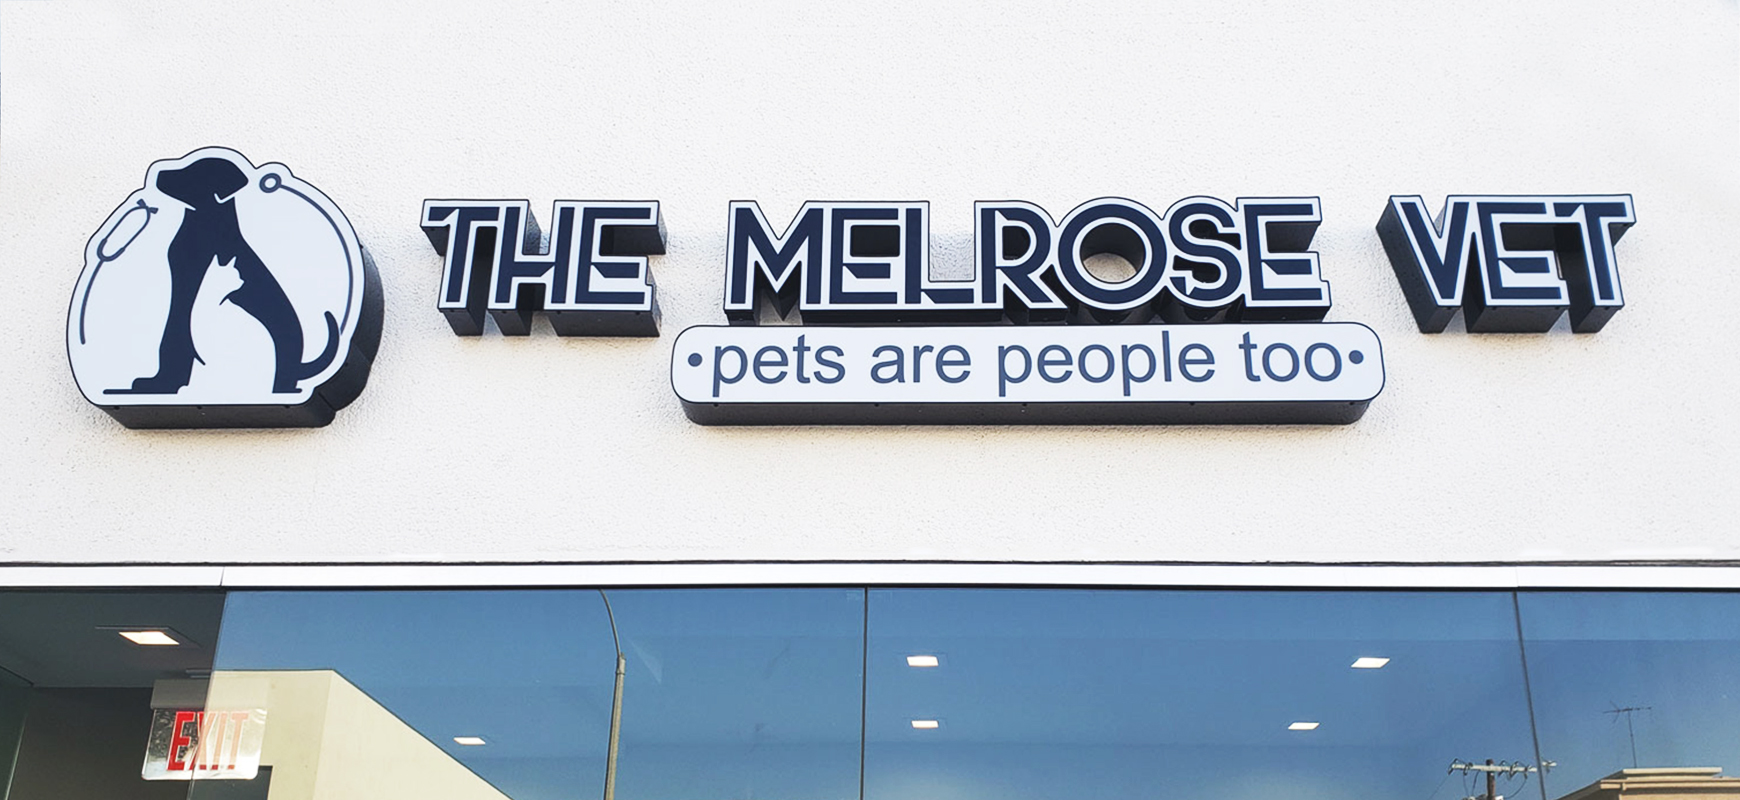 The Melrose Vet light box signs with the company logo and slogan made of aluminum and acrylic